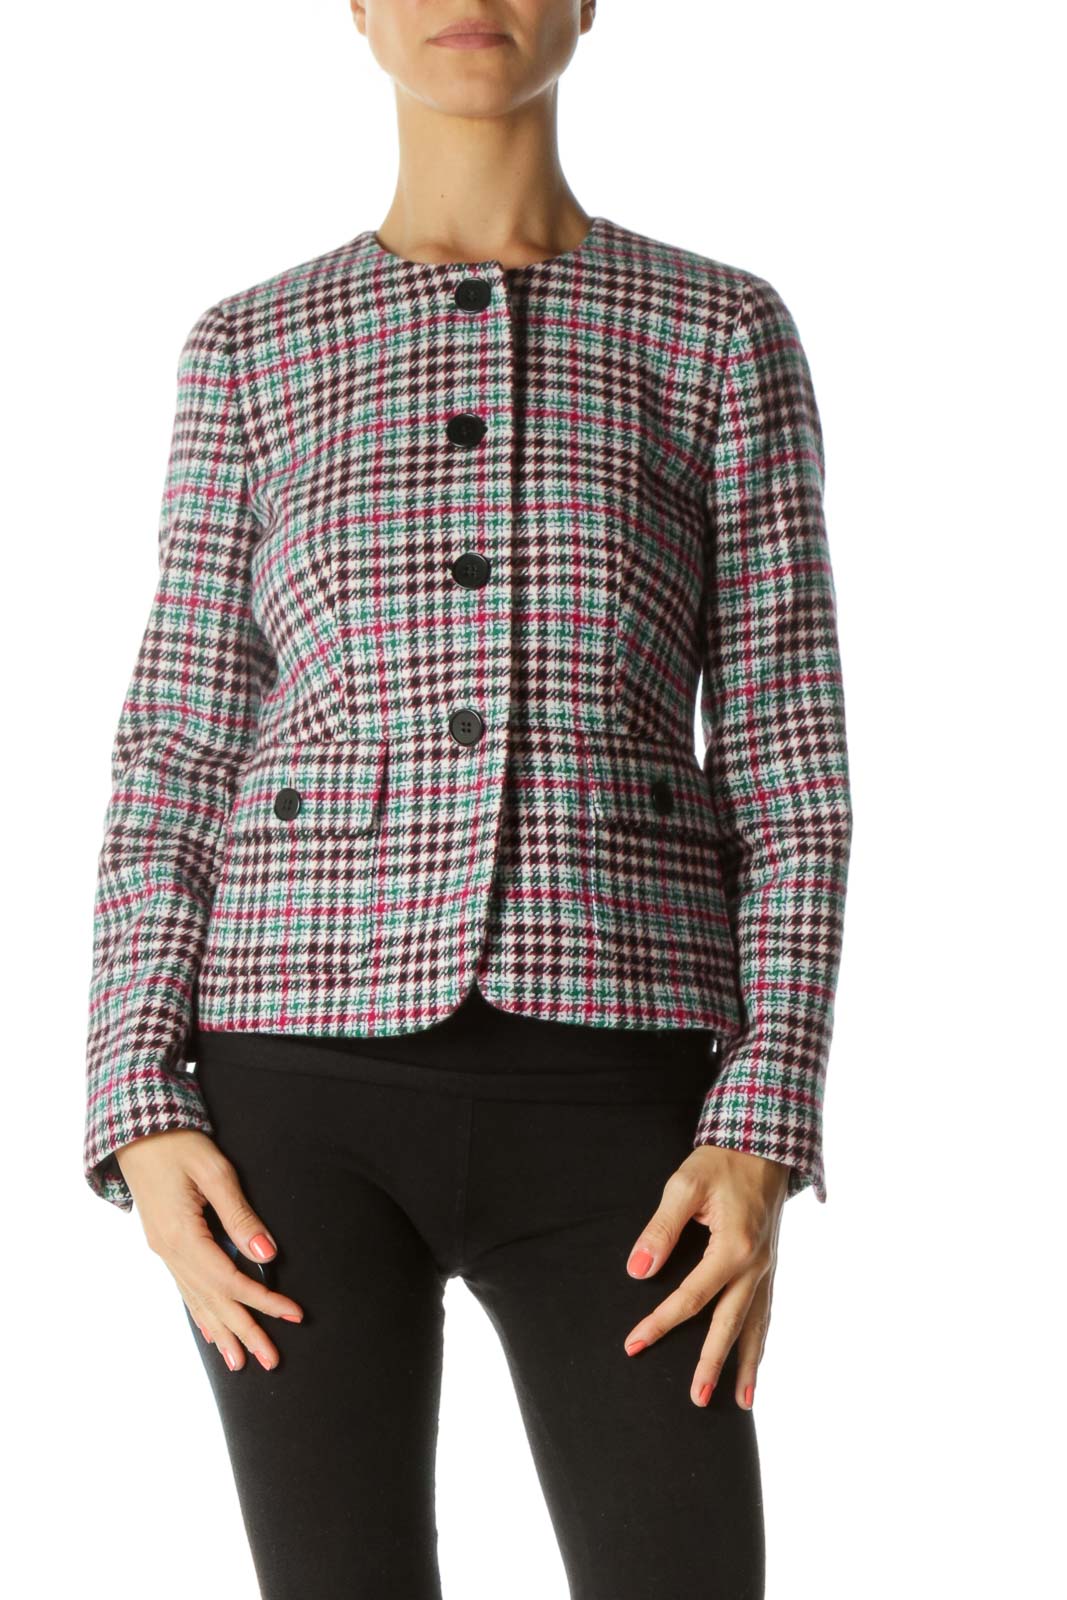 Black, Green and Pink Multicolor Tweed Jacket Front